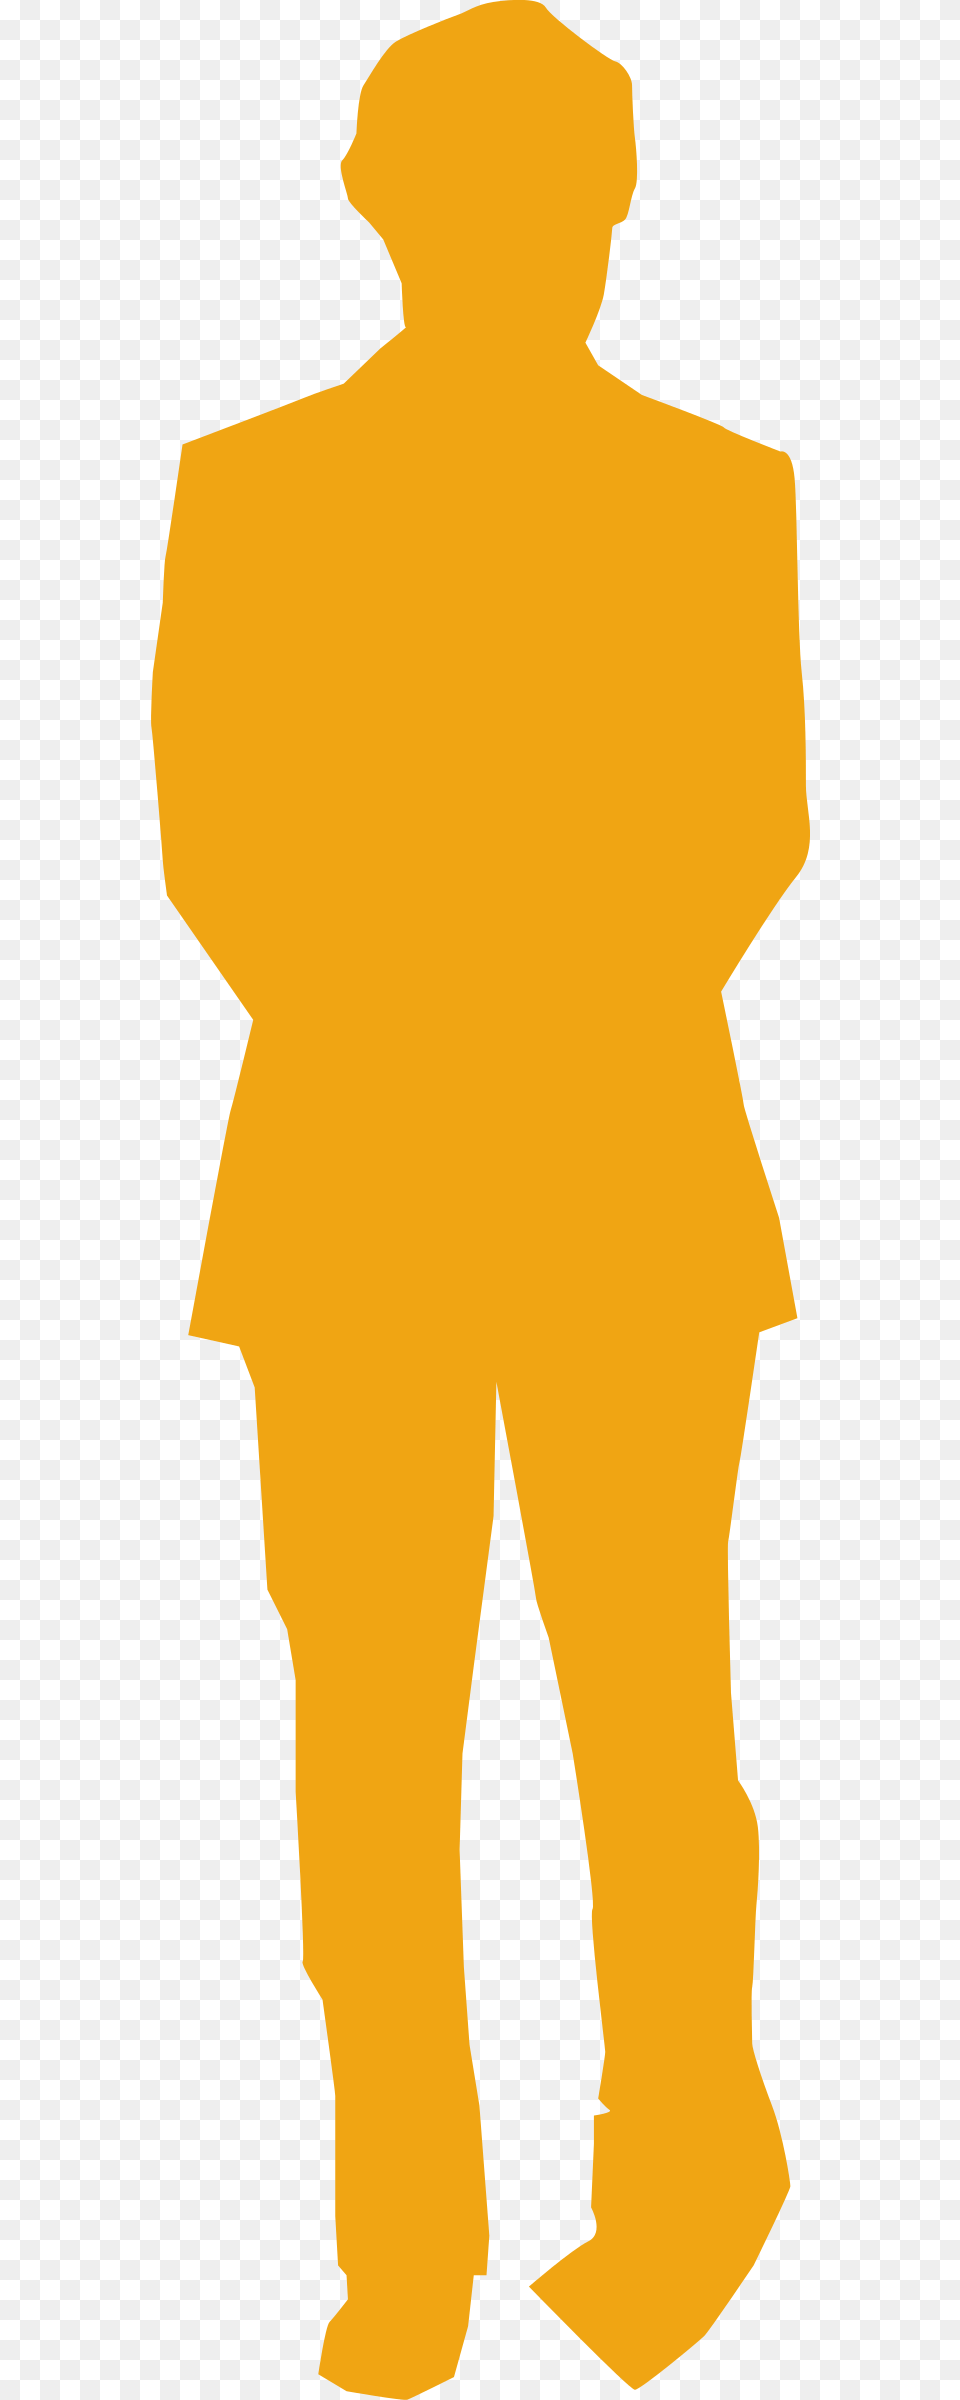 This Icons Design Of Suit Man, Adult, Male, Person, Silhouette Free Transparent Png